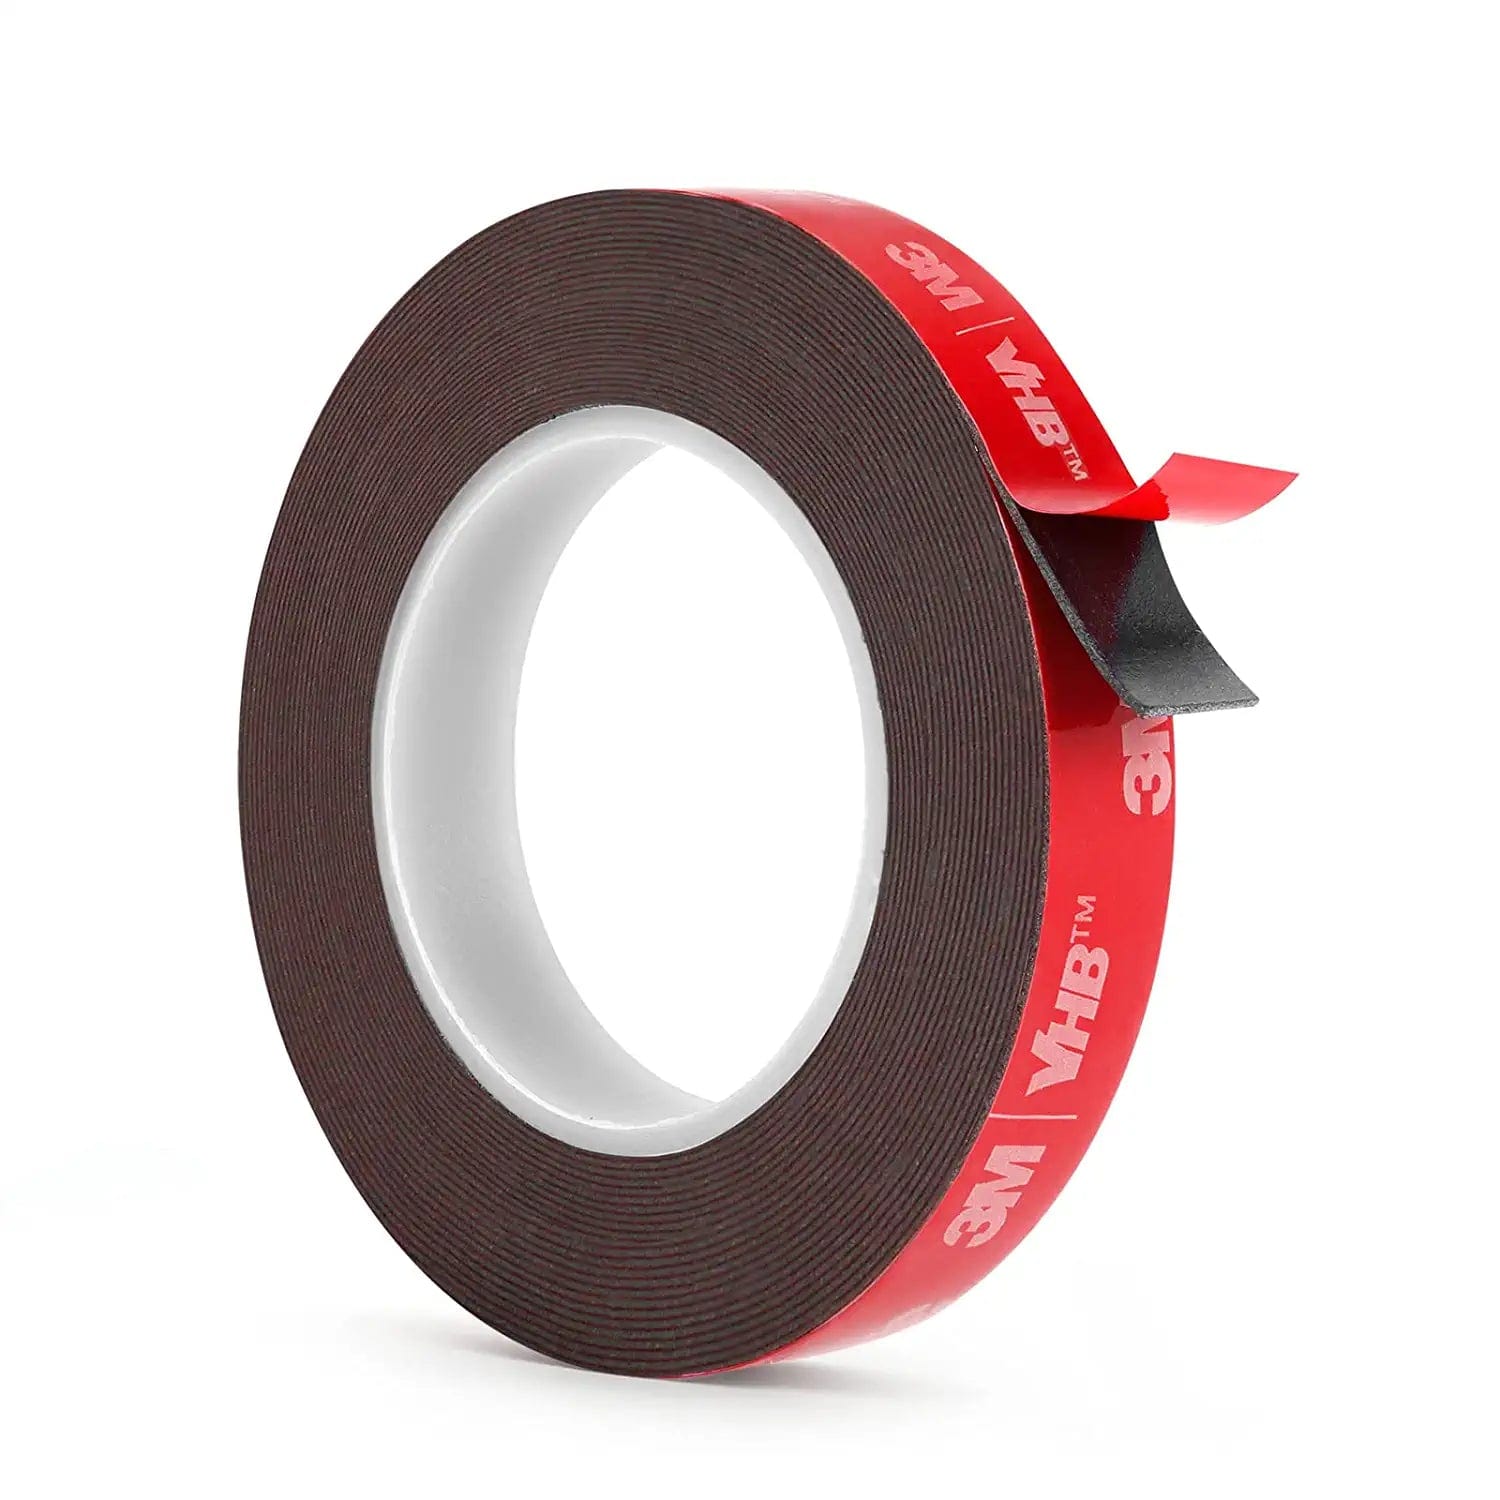 Length 3M Super Strong Double-Sided Tape Waterproof Outdoor Heavy